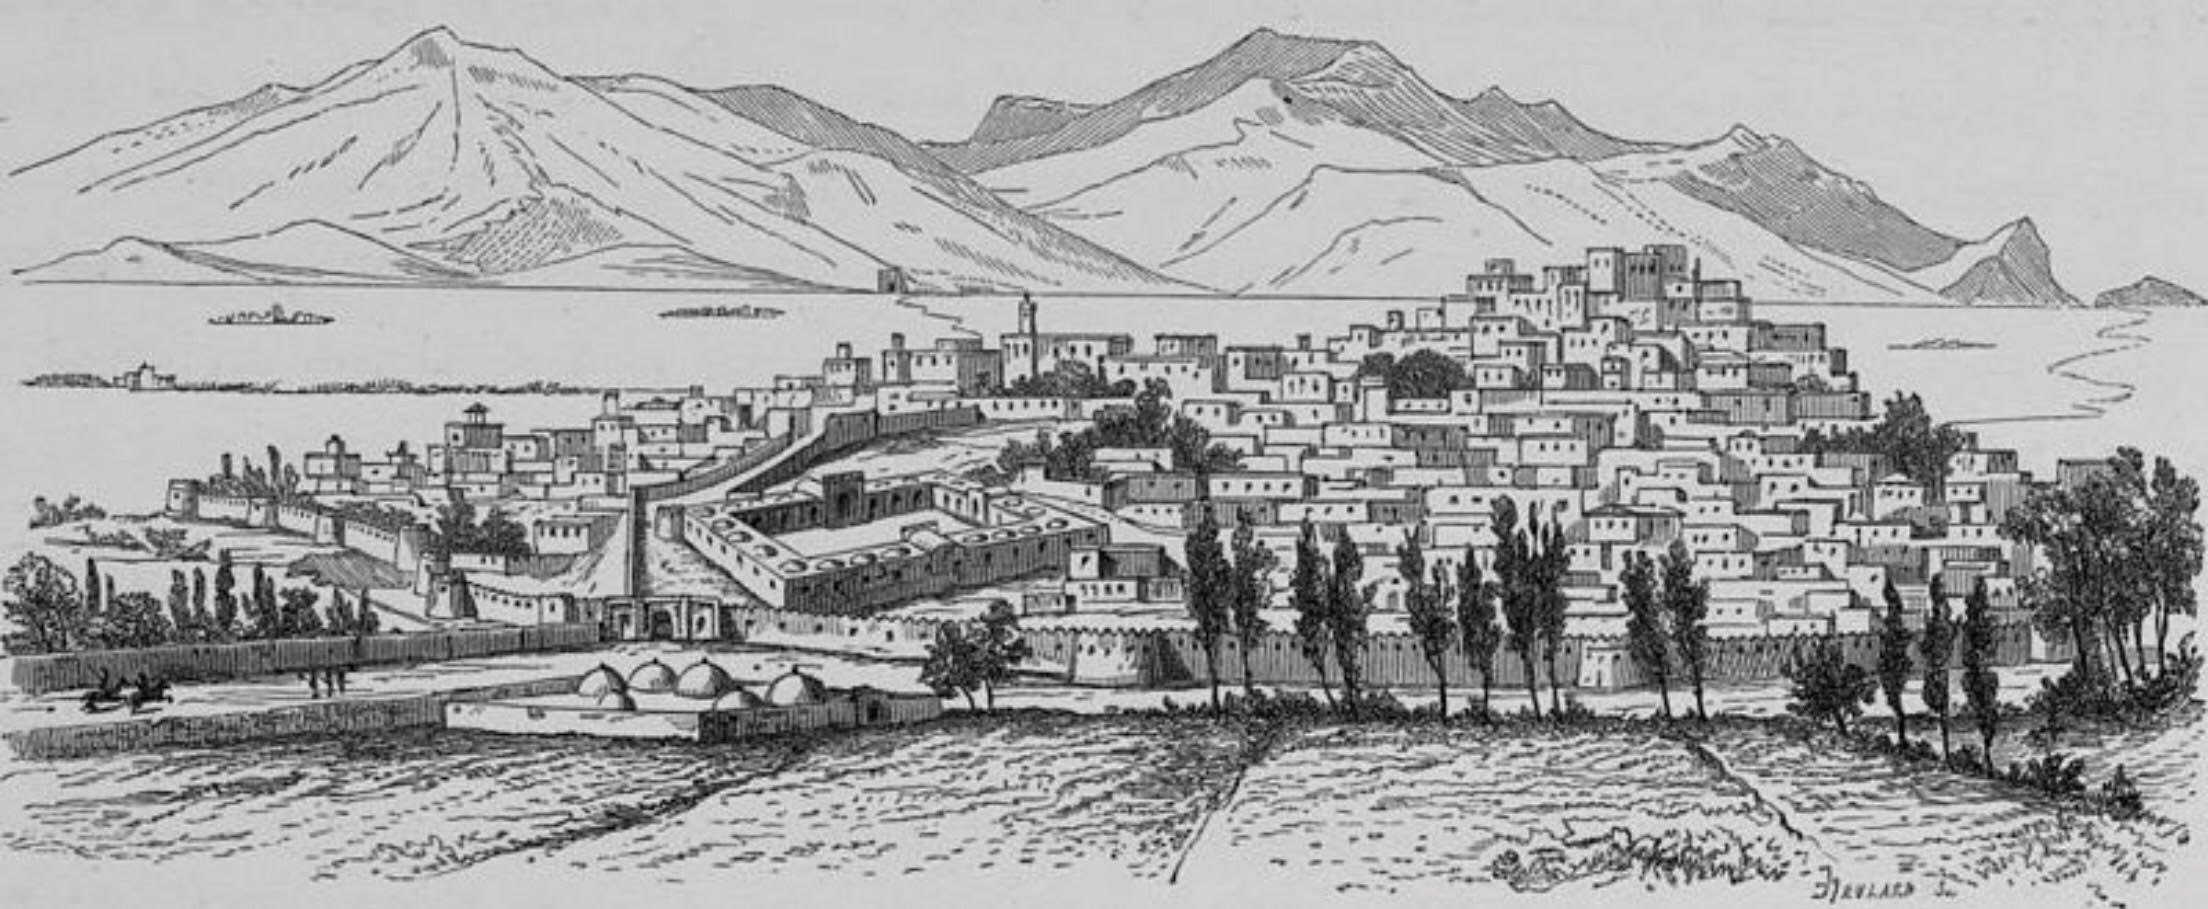 Sketch of the western Iranian city of Kermanshah from 1840